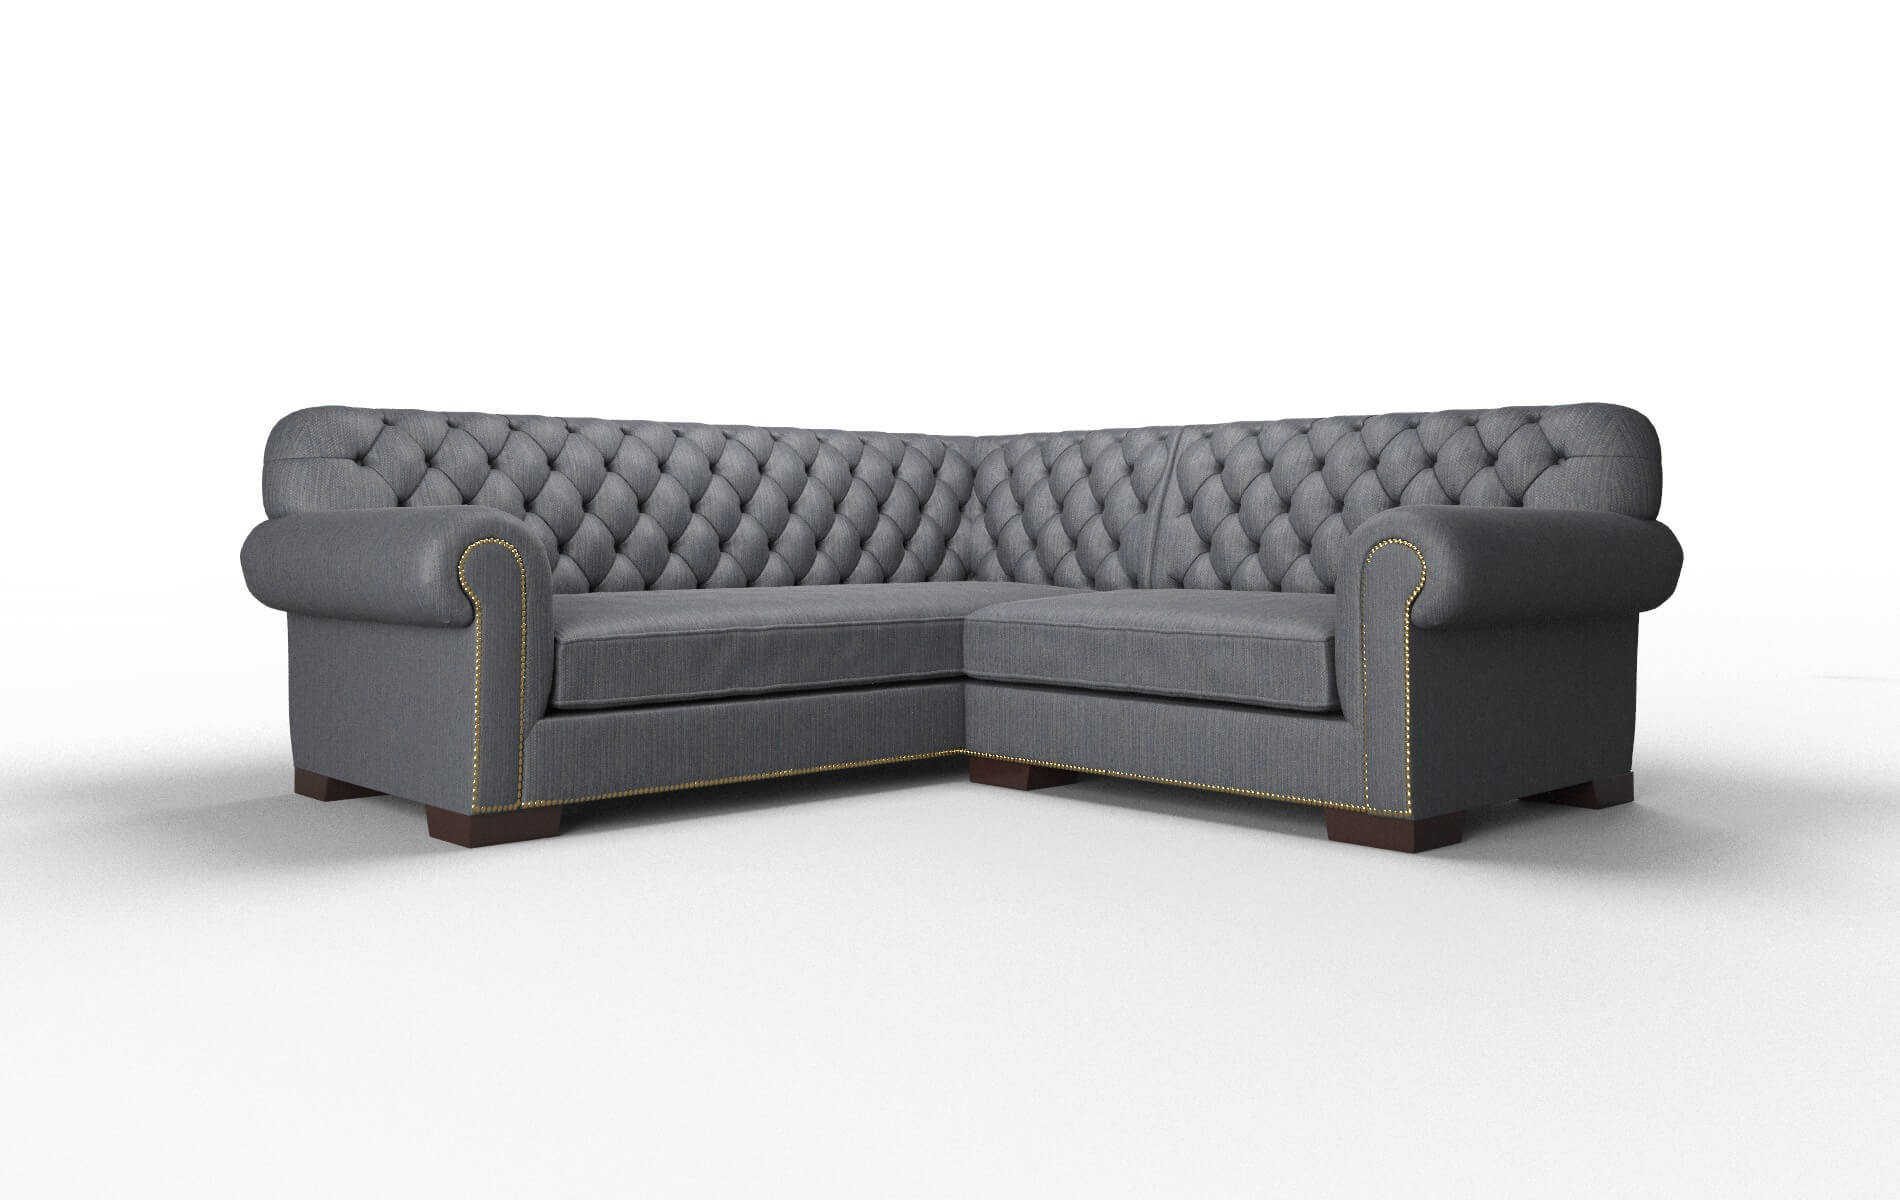 Chester Rocket Eclipse Sectional espresso legs